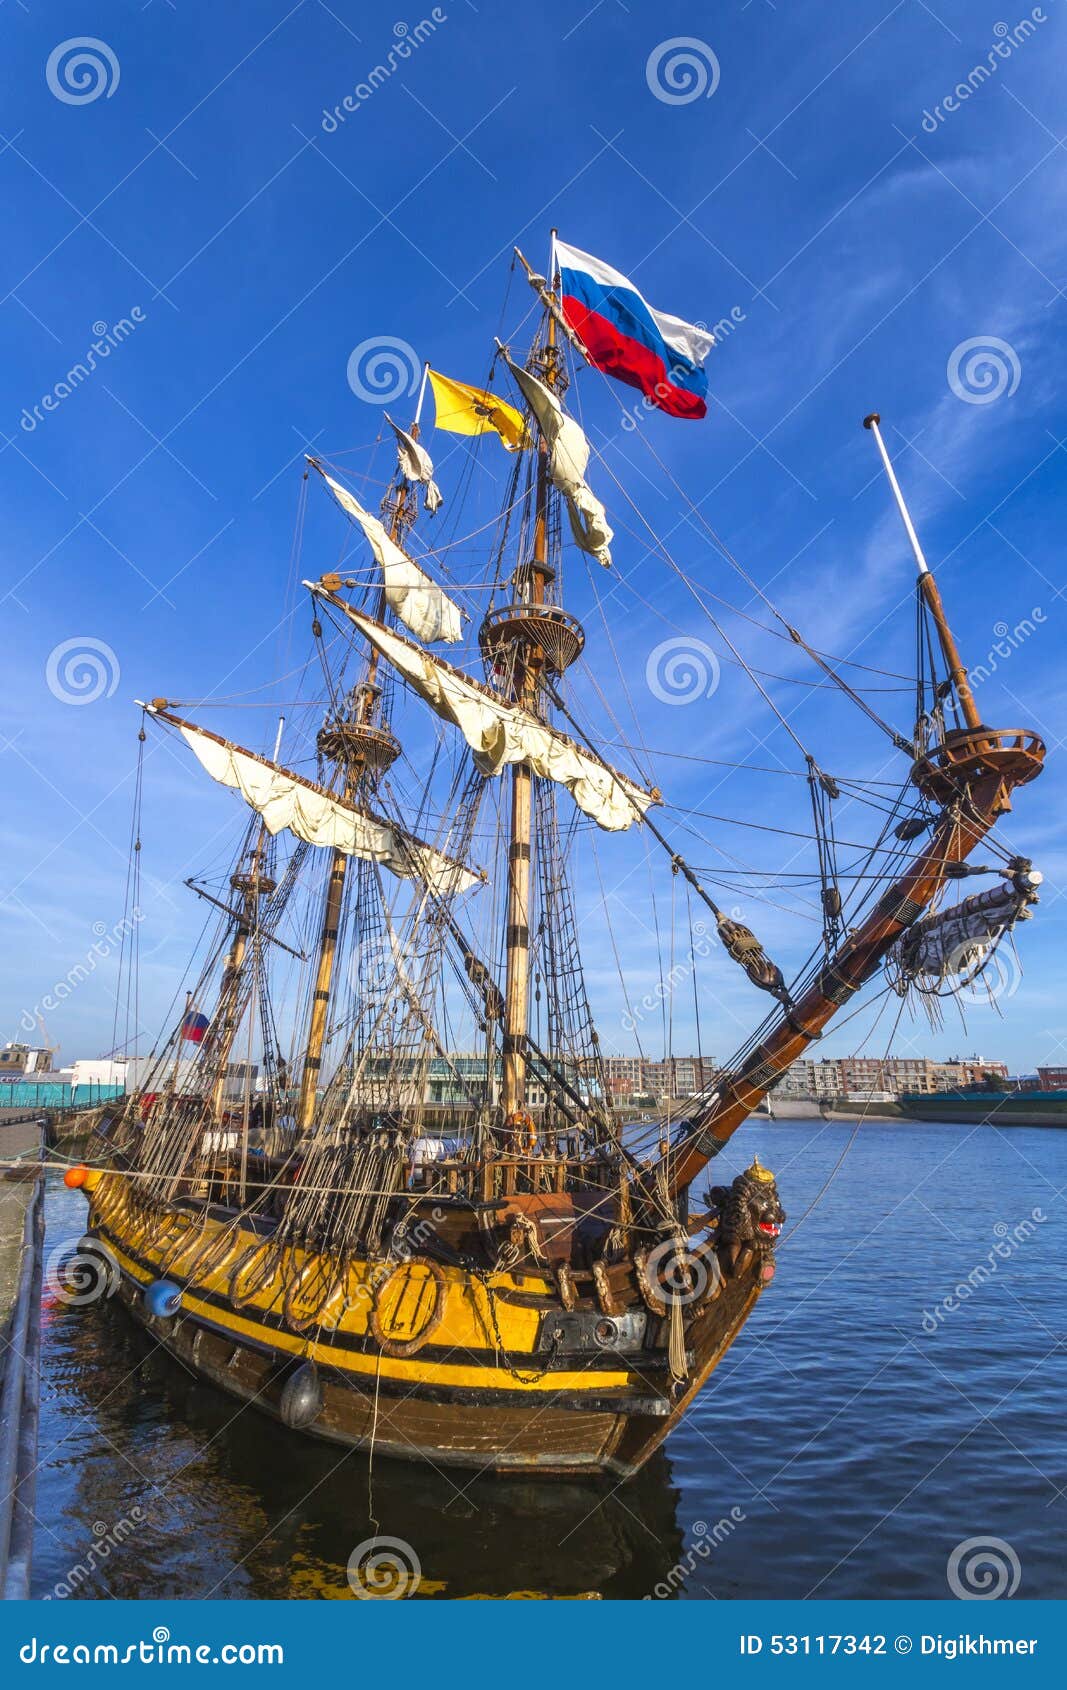 Dutch Pirate Ship stock photo. Image of background, long - 53117342